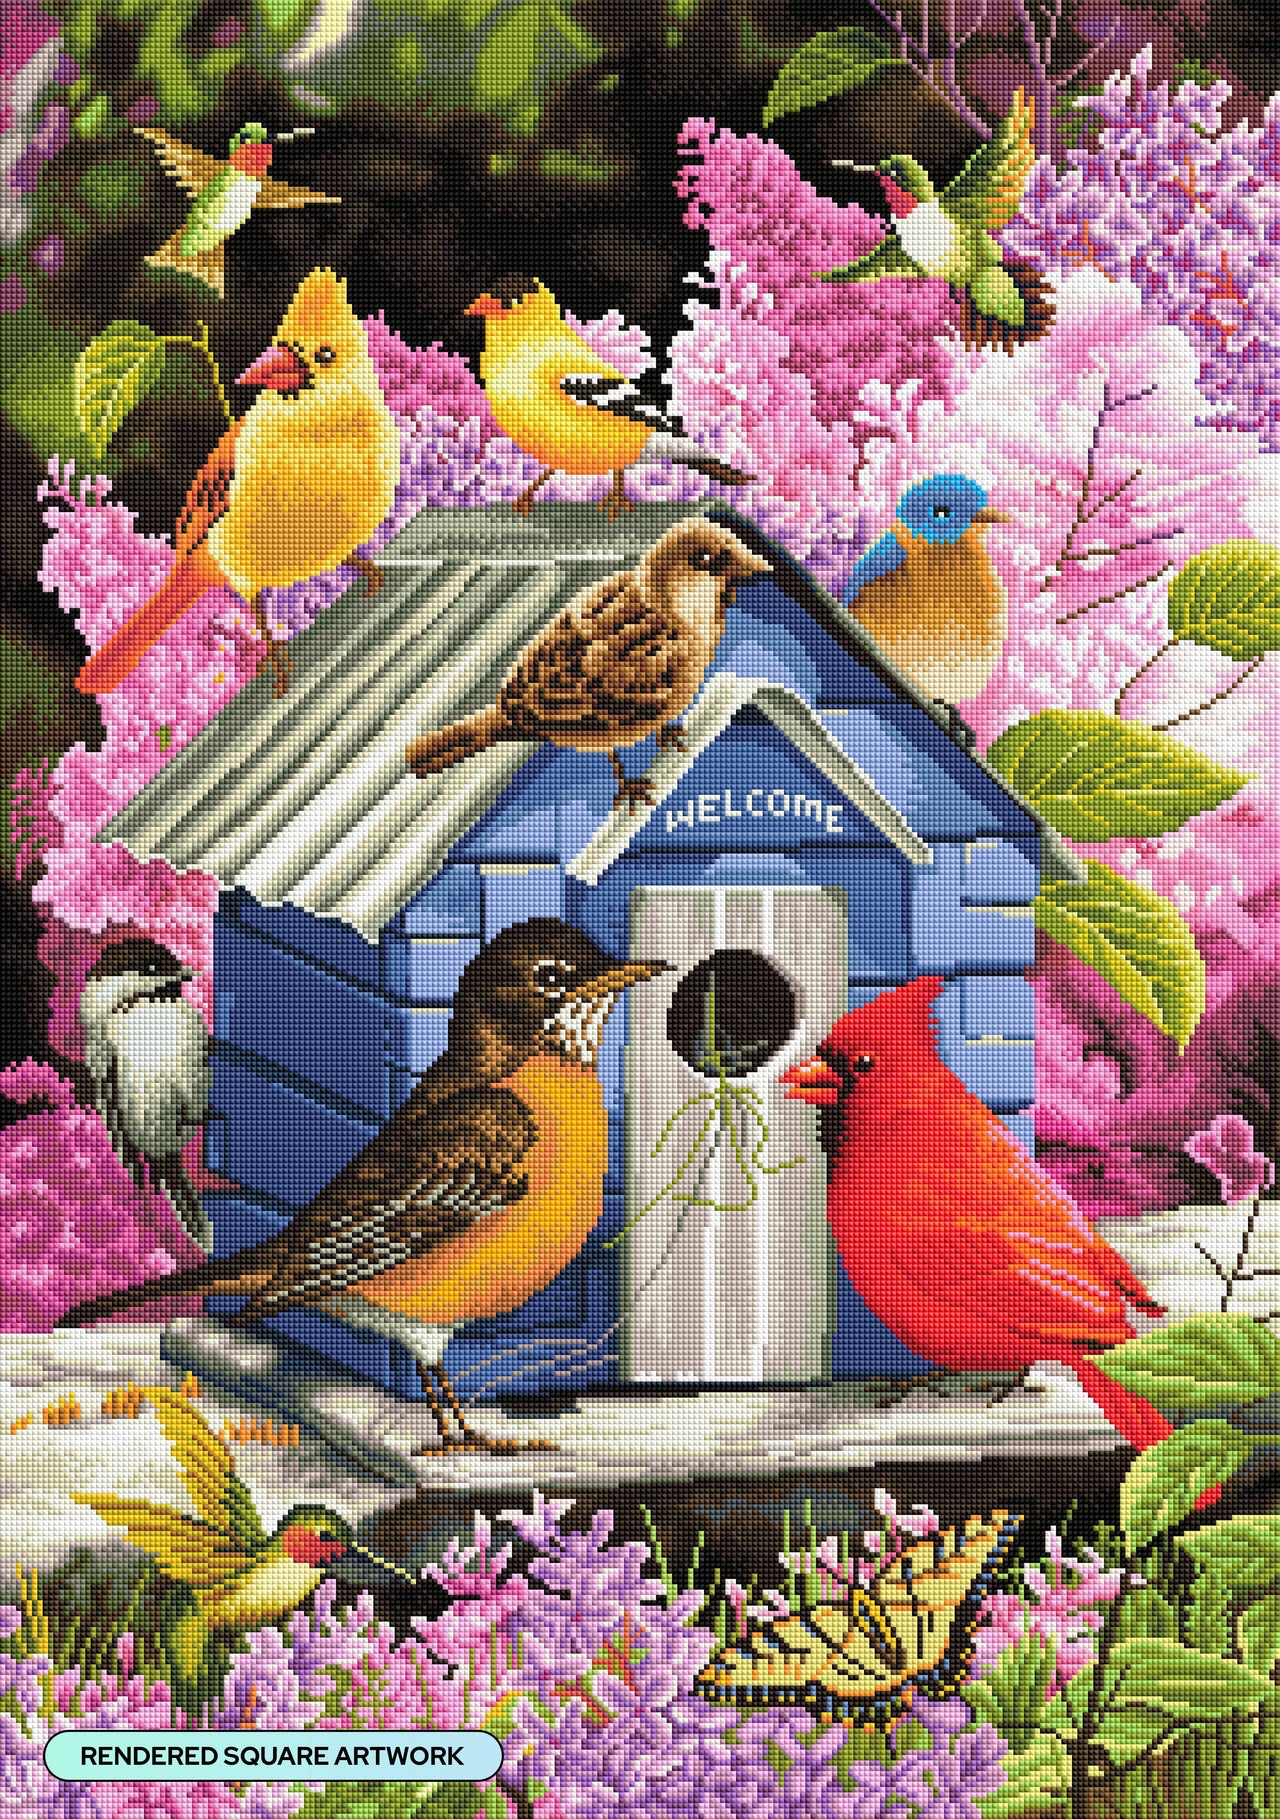 Diamond Painting Spring Birdhouse 23.6" x 33.5" (60cm x 85cm) / Square with 68 Colors including 4 ABs and 2 Fairy Dust Diamonds / 81,840